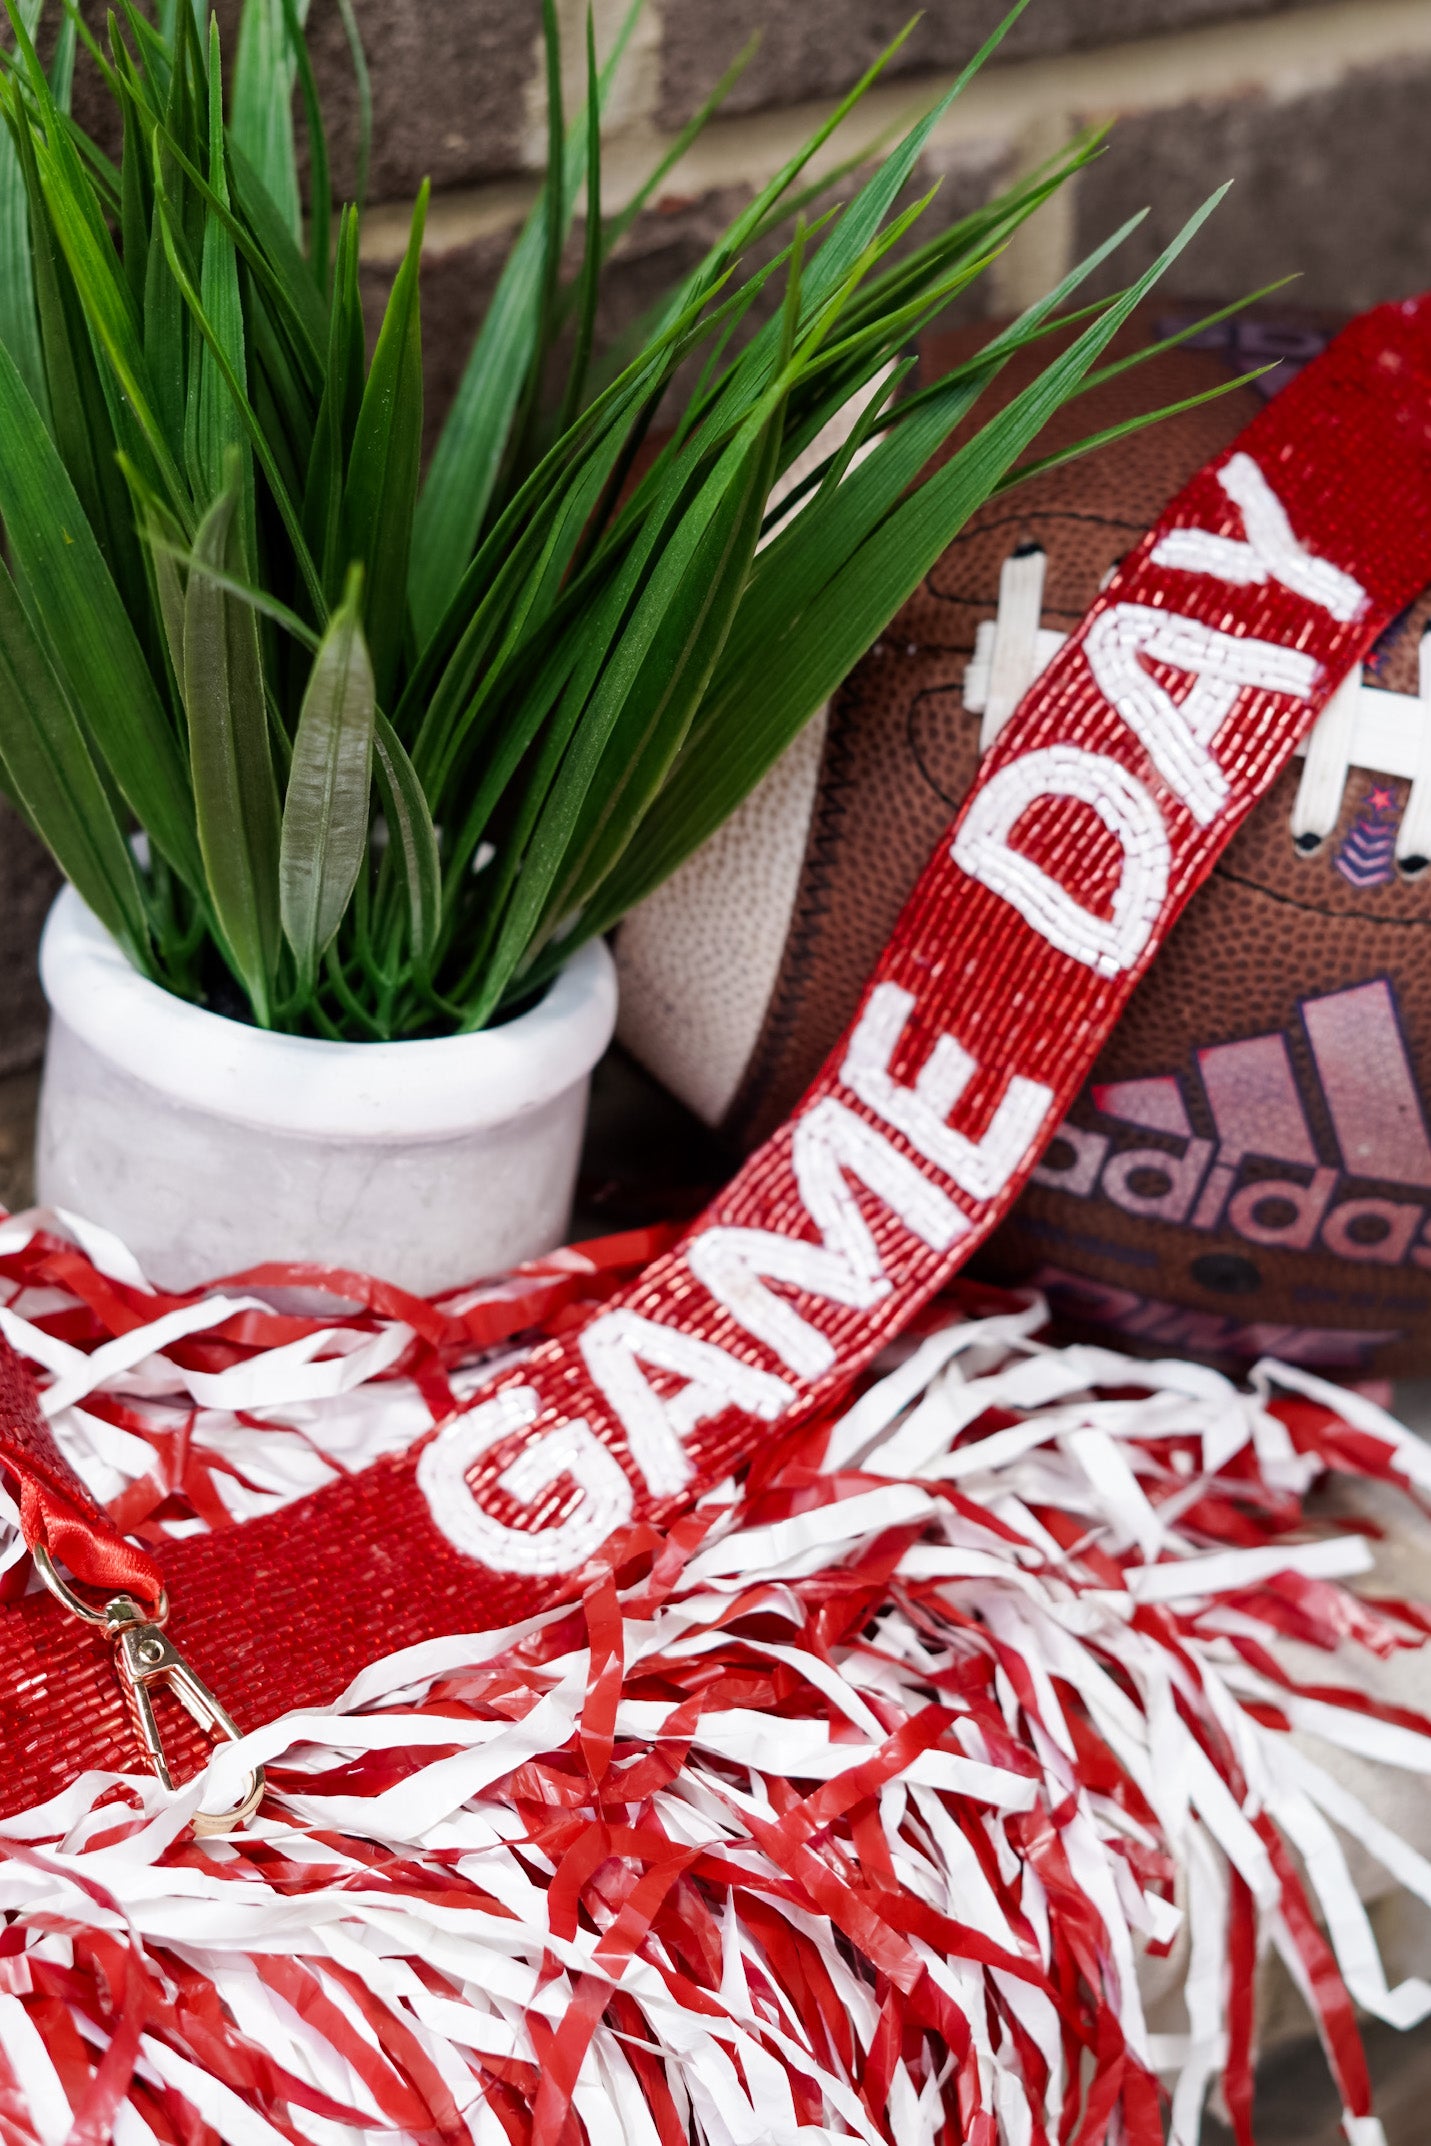 Crimson beads with white lettering that says "Game Day"